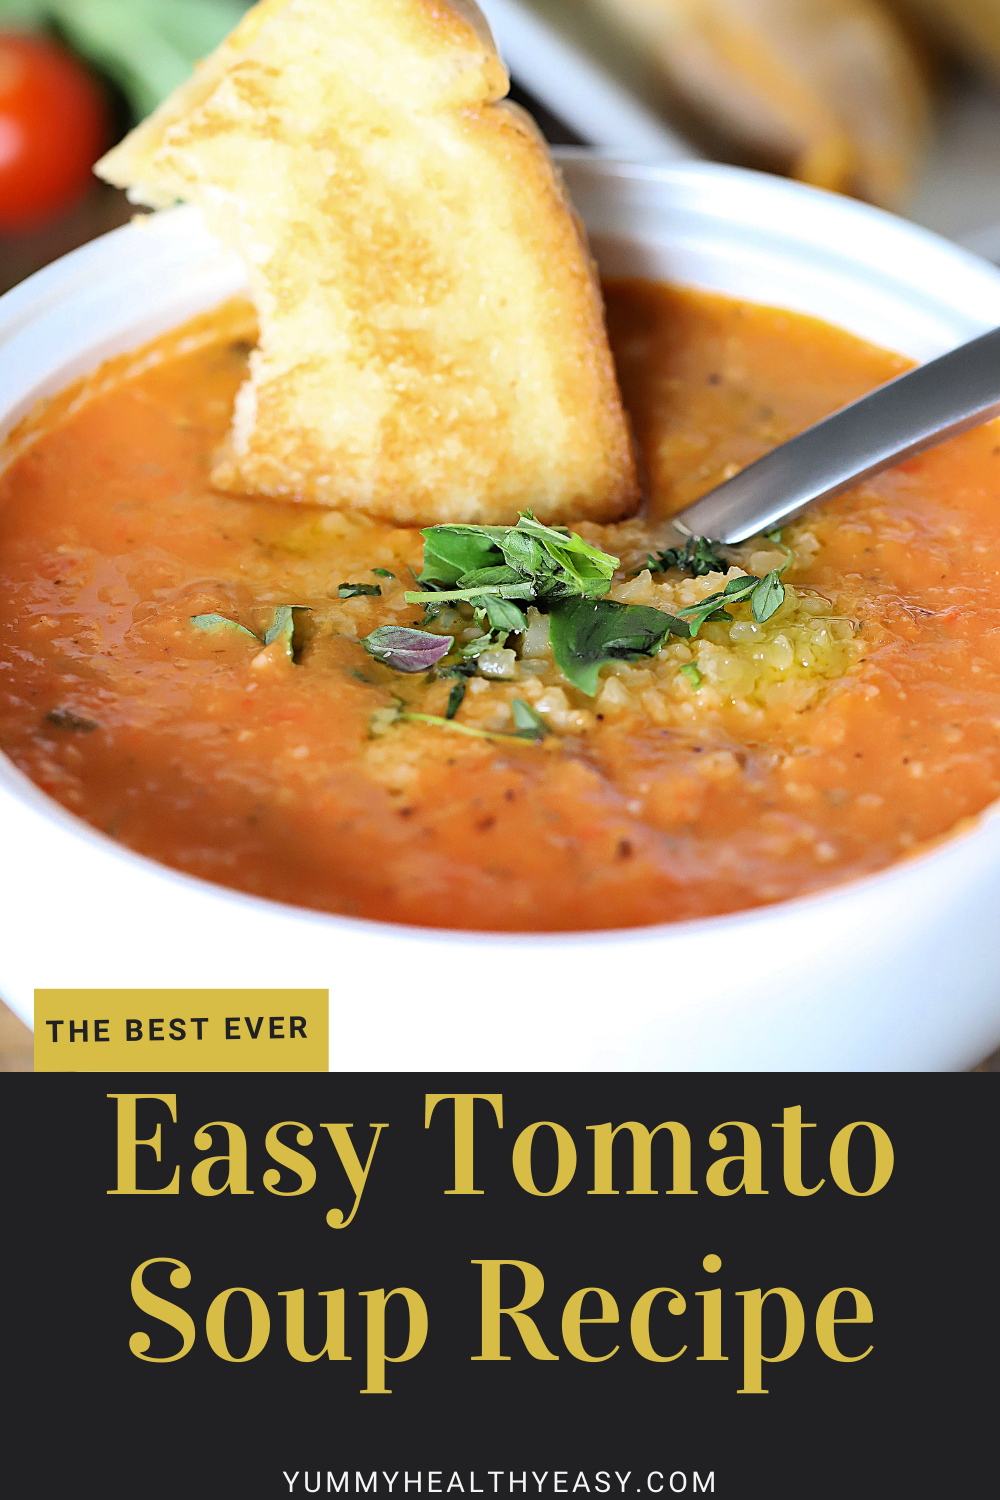 This is the easiest tomato soup recipe you will ever make!  Tomatoes, peppers, onions, garlic and spices are roasted and then blended into a delicious, easy soup that everyone will love.  It's the perfect side to a grilled cheese sandwich!  #soup #dinner #healthy #delicious #tomatoes #vegetables via @jennikolaus